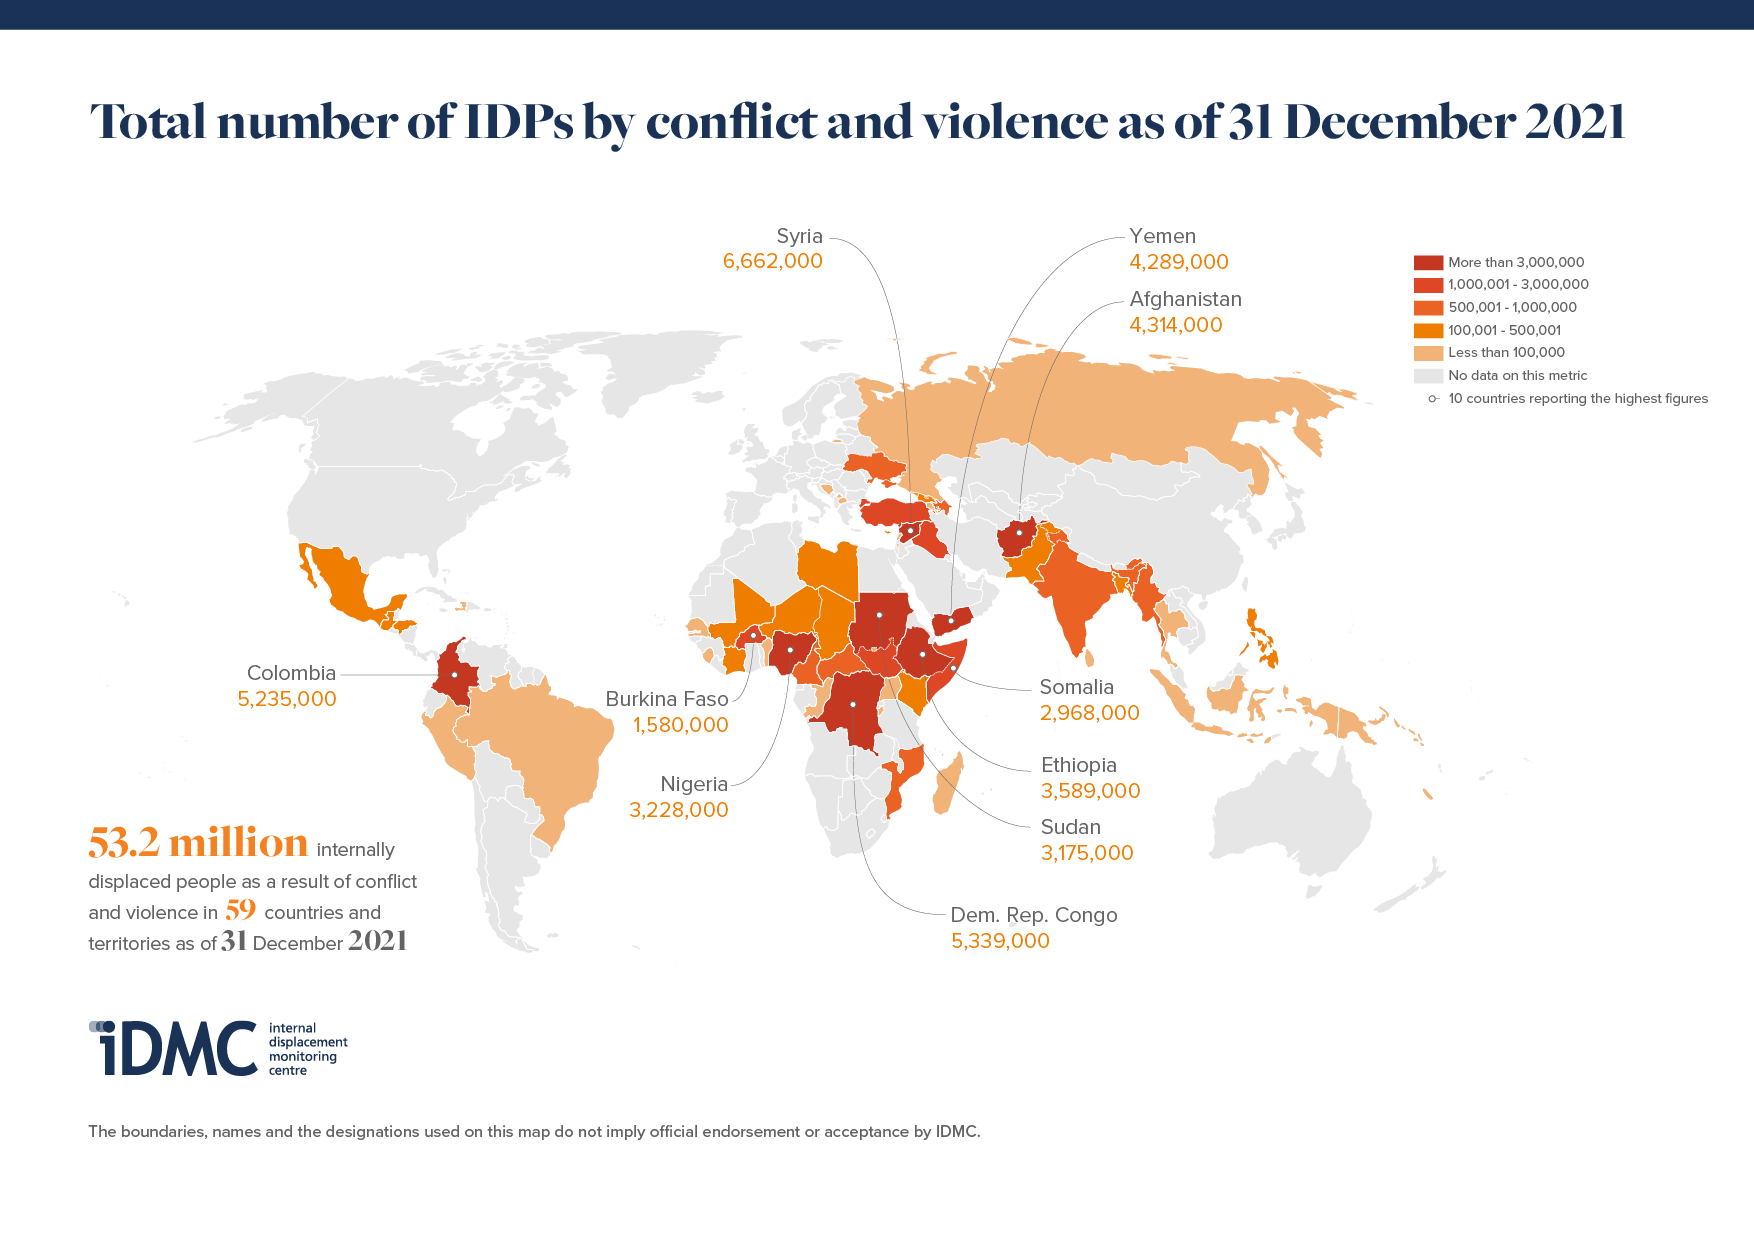 IDMC GRID2022 Total Number of IDPs by Conflict and Violence as of 31 Decemeber 2021